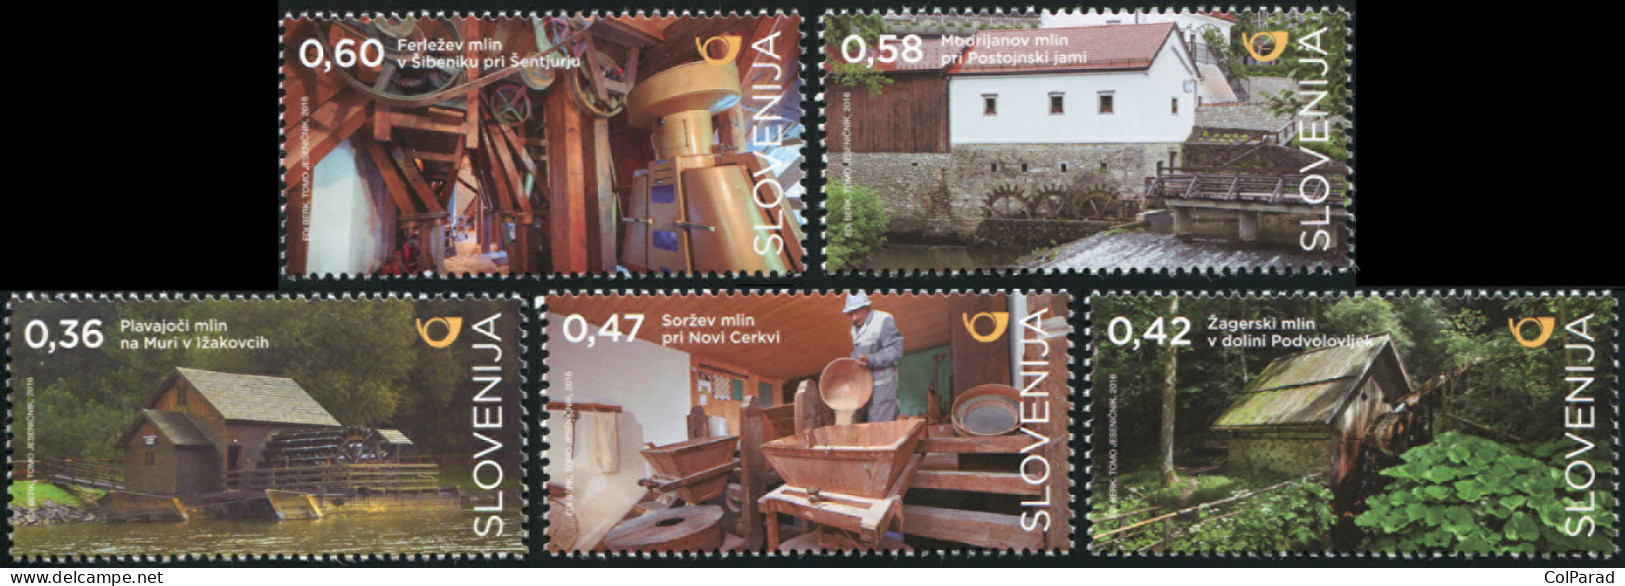 SLOVENIA - 2016 - SET OF 5 STAMPS MNH ** - Mills In Slovenia - Slowenien